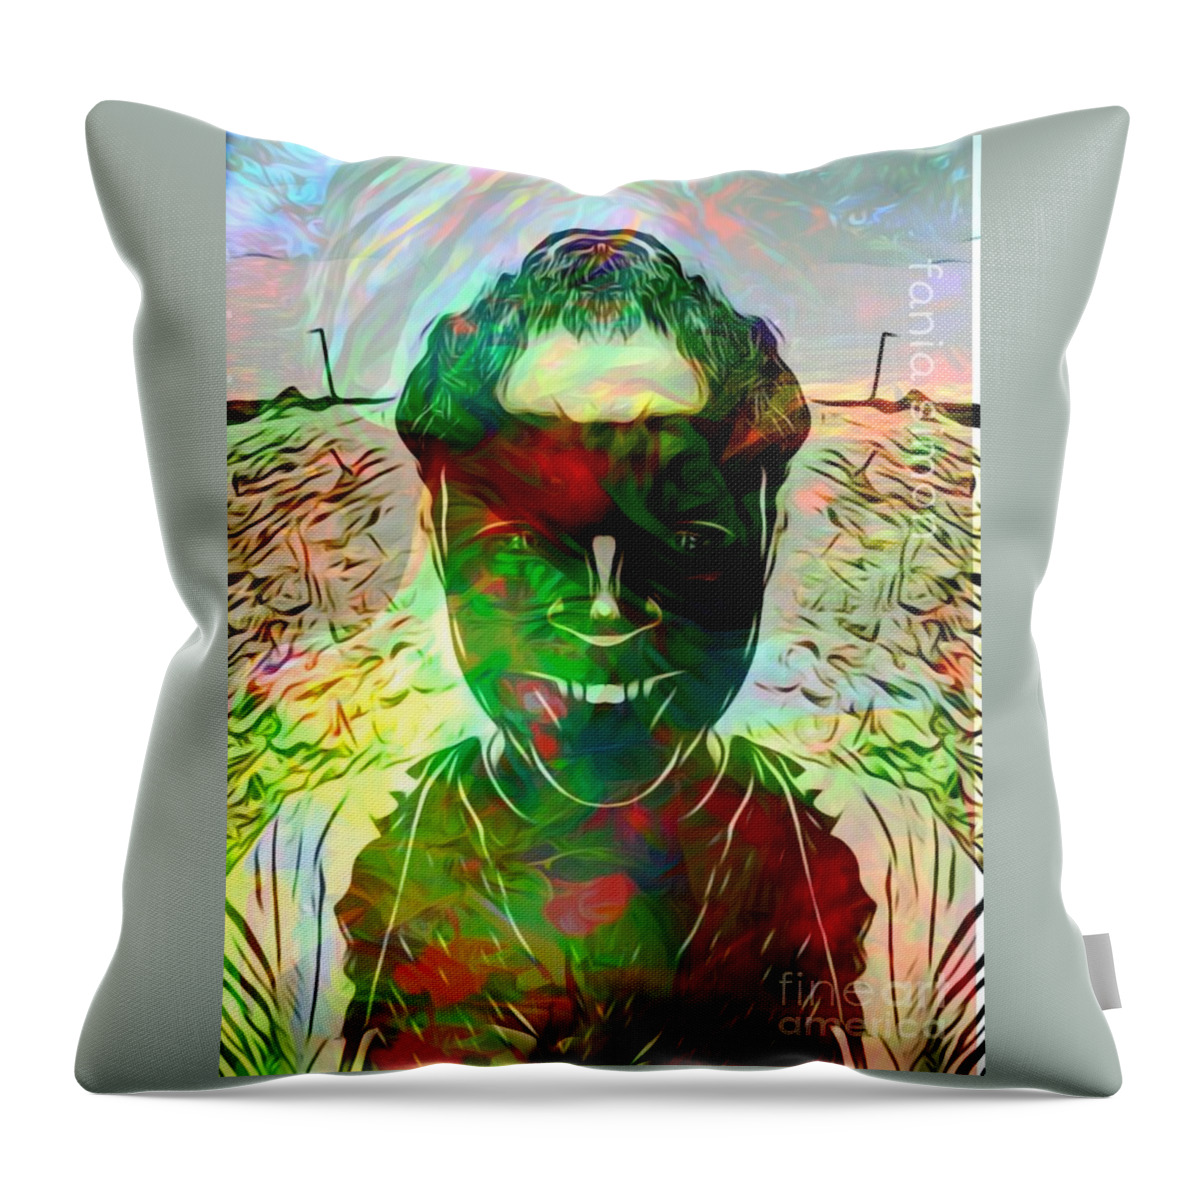  Throw Pillow featuring the mixed media Mystery by Fania Simon